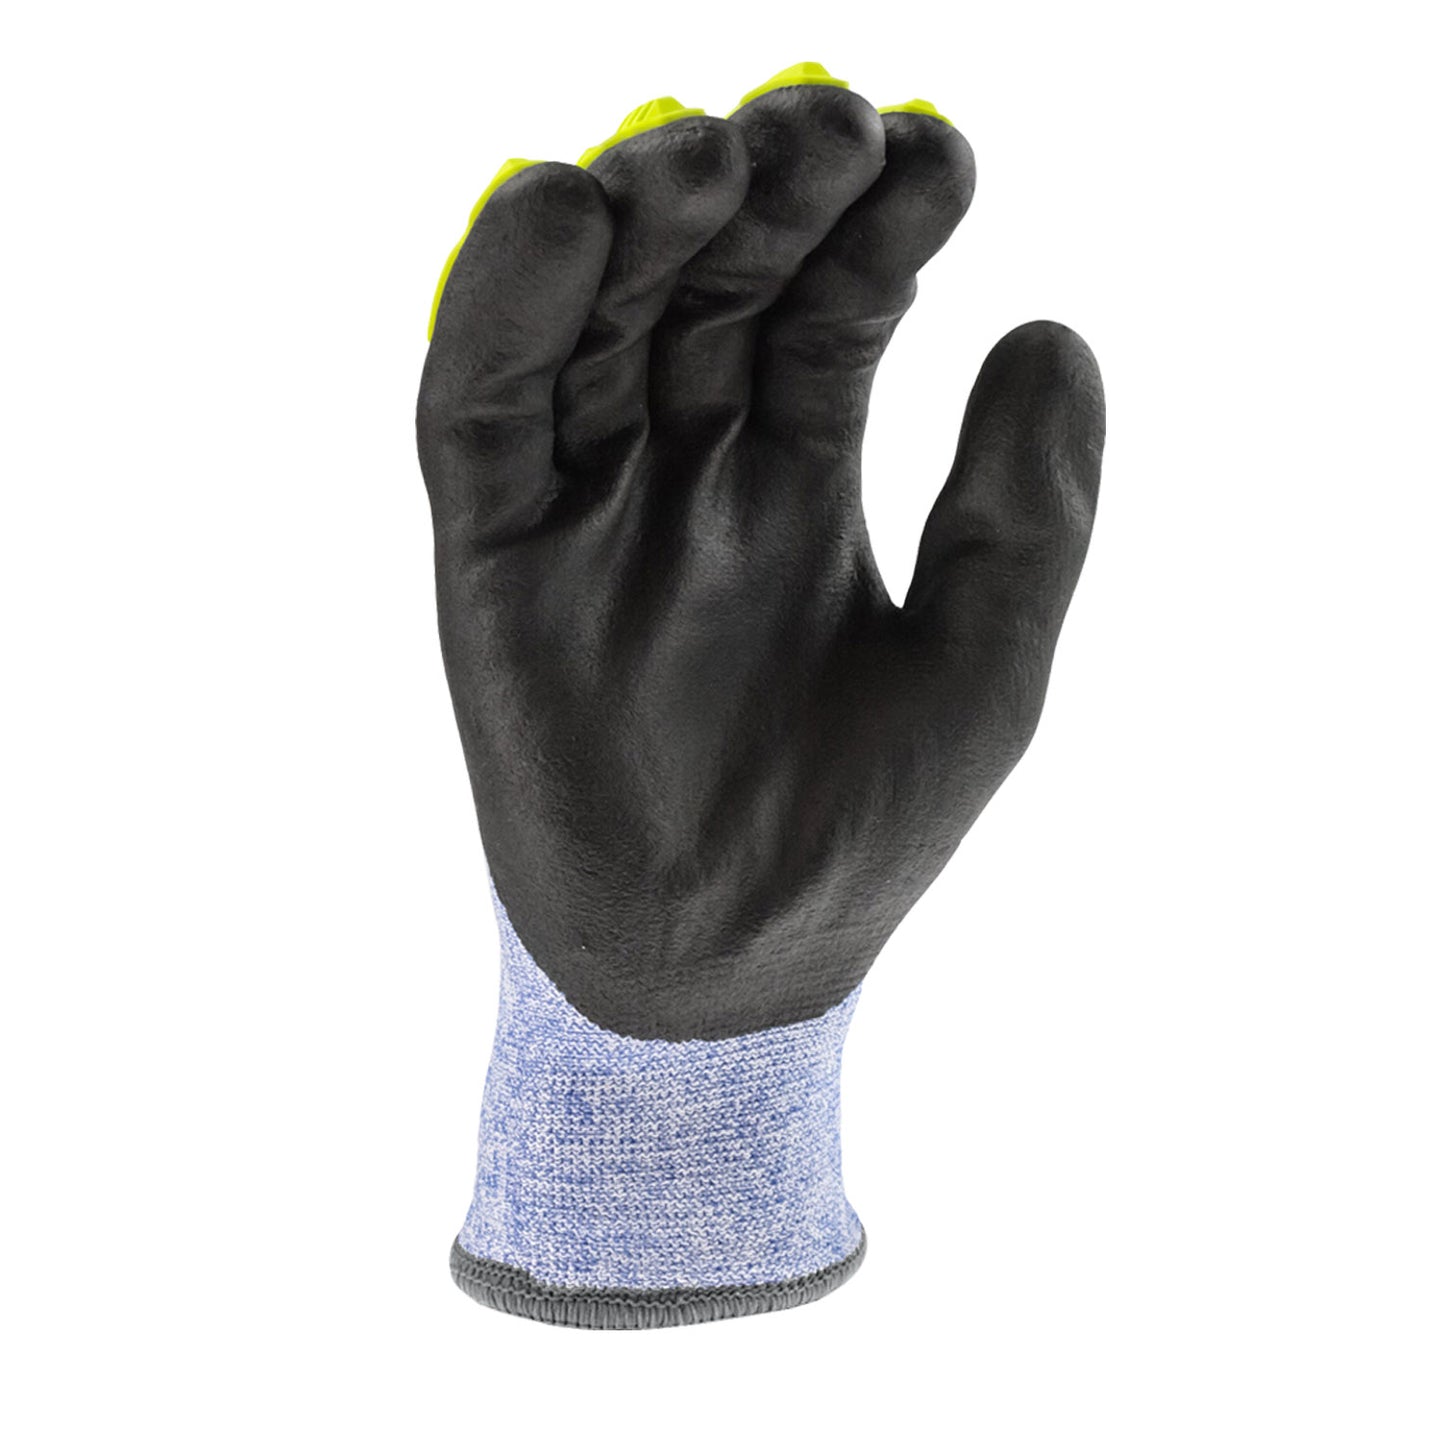 RADIANS RWG604 CUT PROTECTION LEVEL A4 COLD WEATHER COATED GLOVE